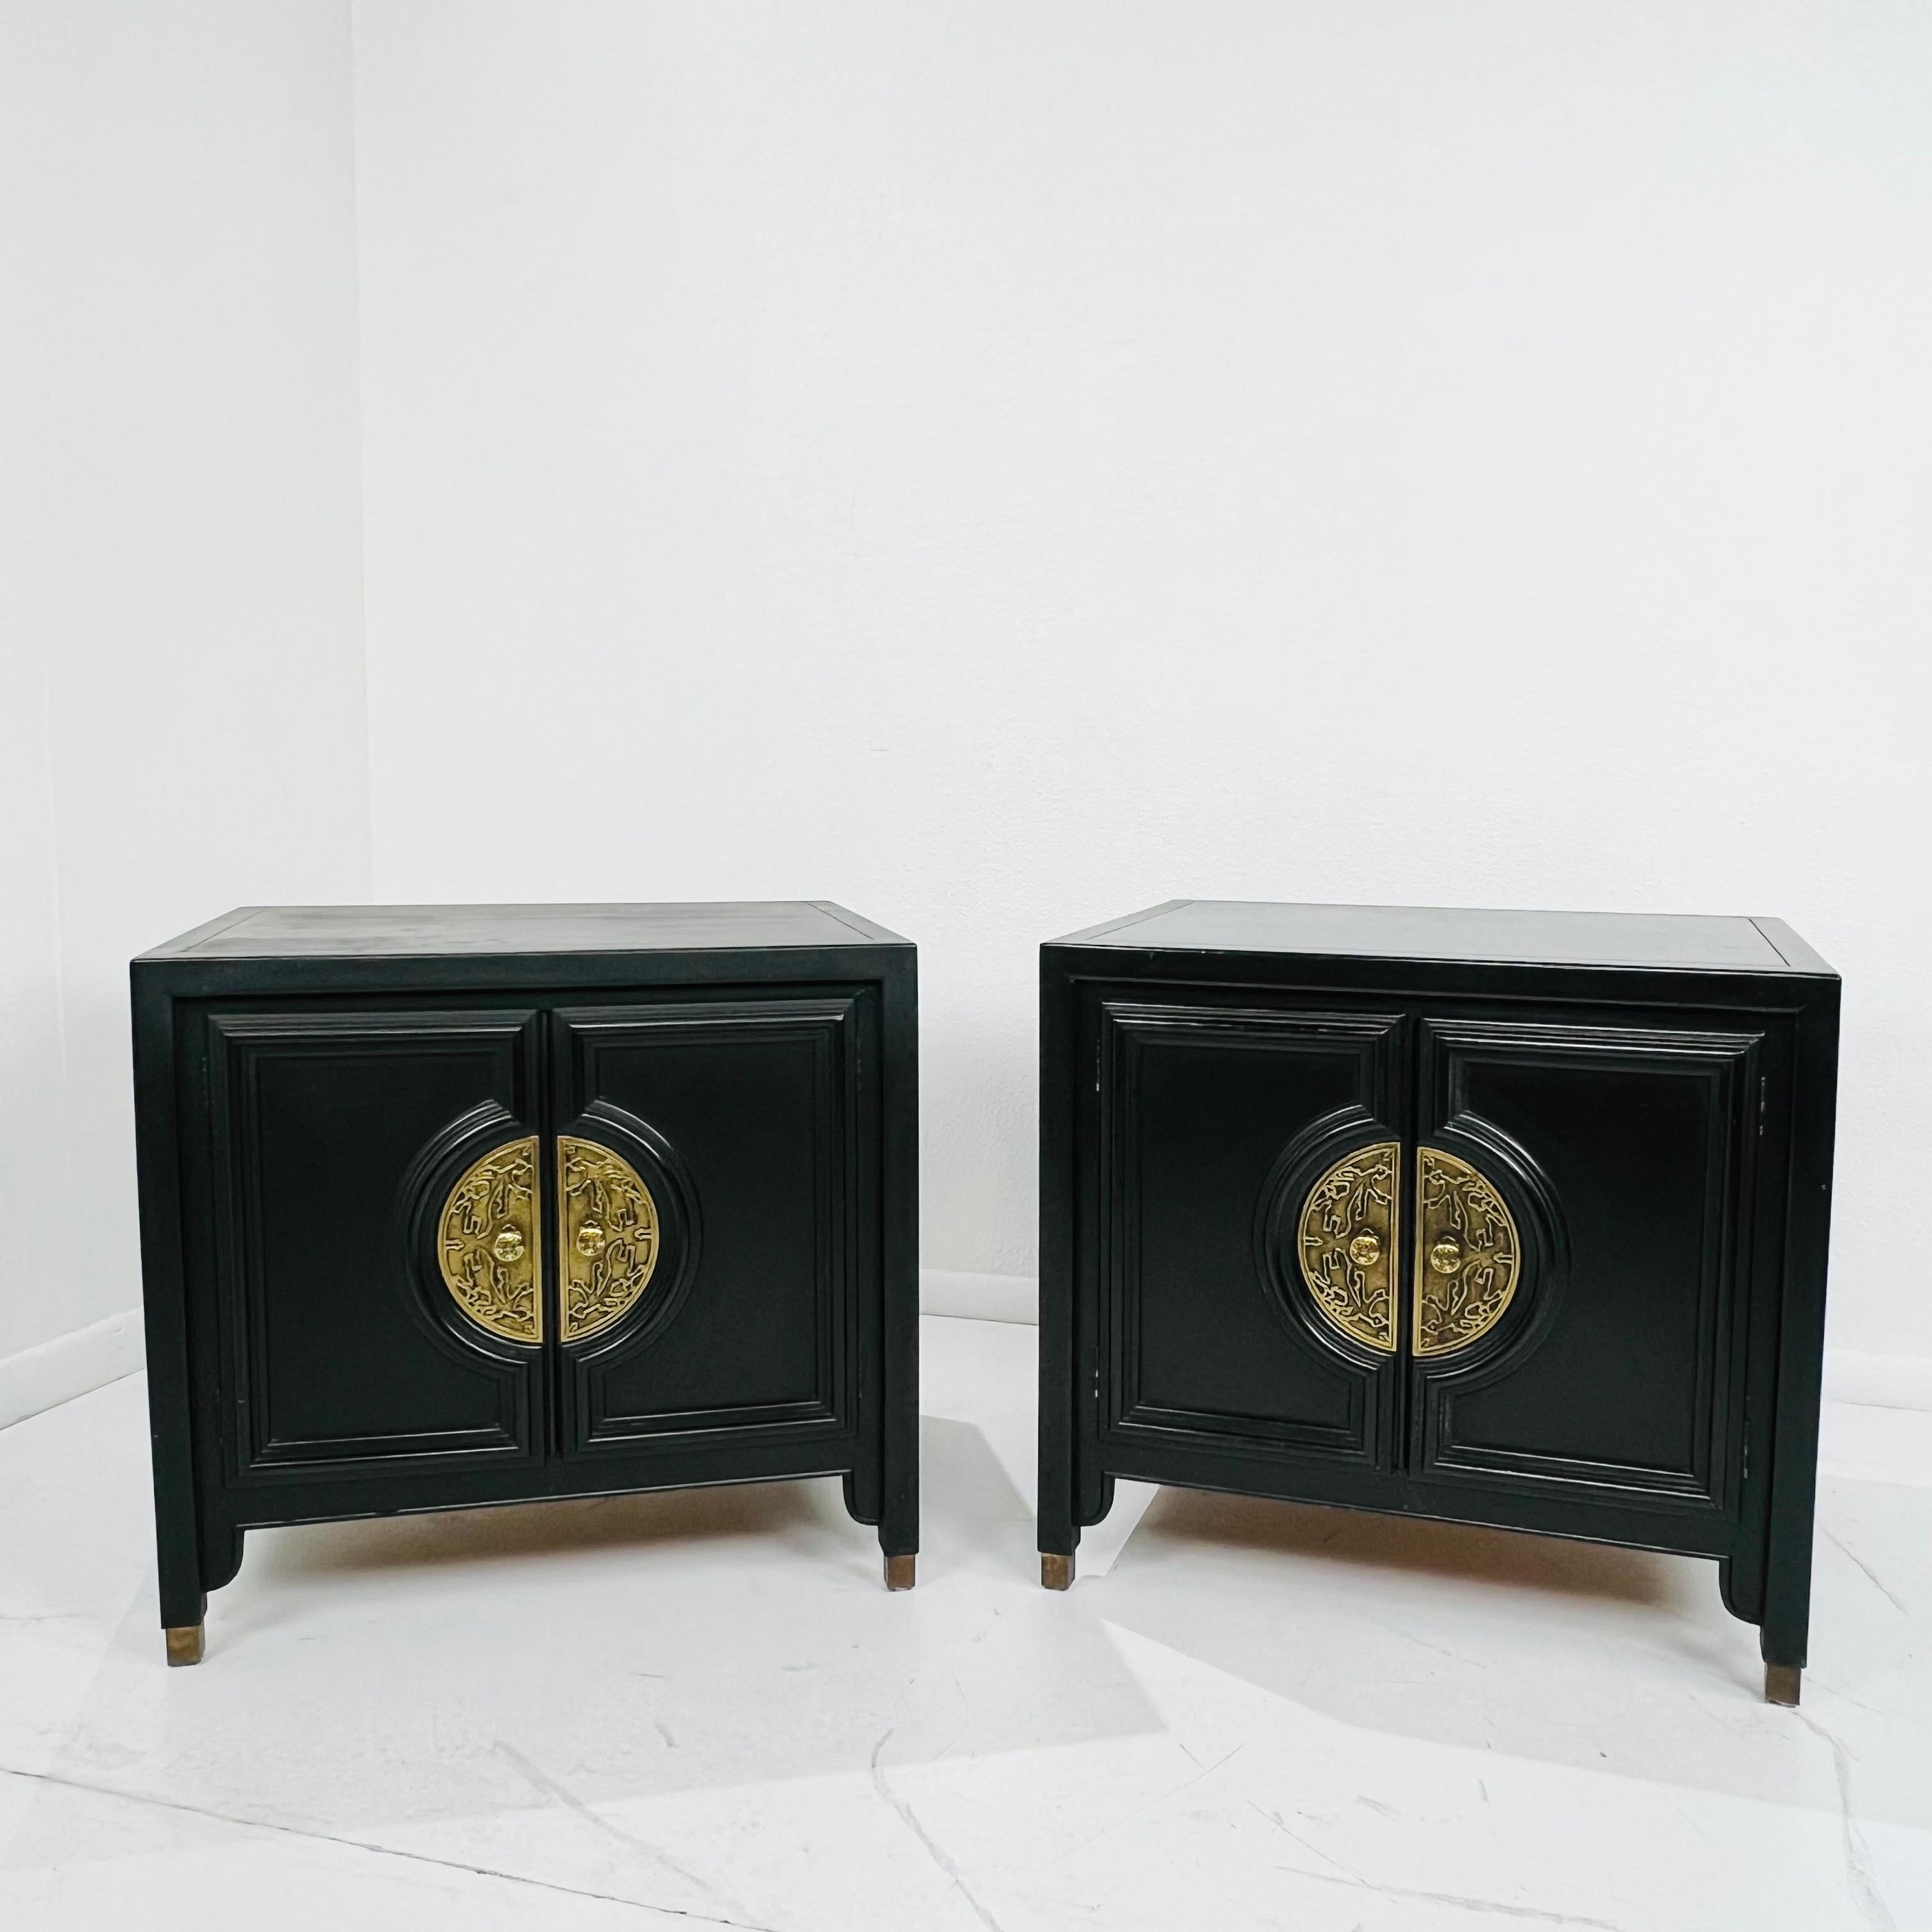 Pair of Chin Hua nightstands by Century Furniture. Ebonized cases with brass hardware and brass-tipped feet. Open cabinet space with shelf. Good structural condition with some cosmetic imperfections, including scratches/scuffs and damage to top